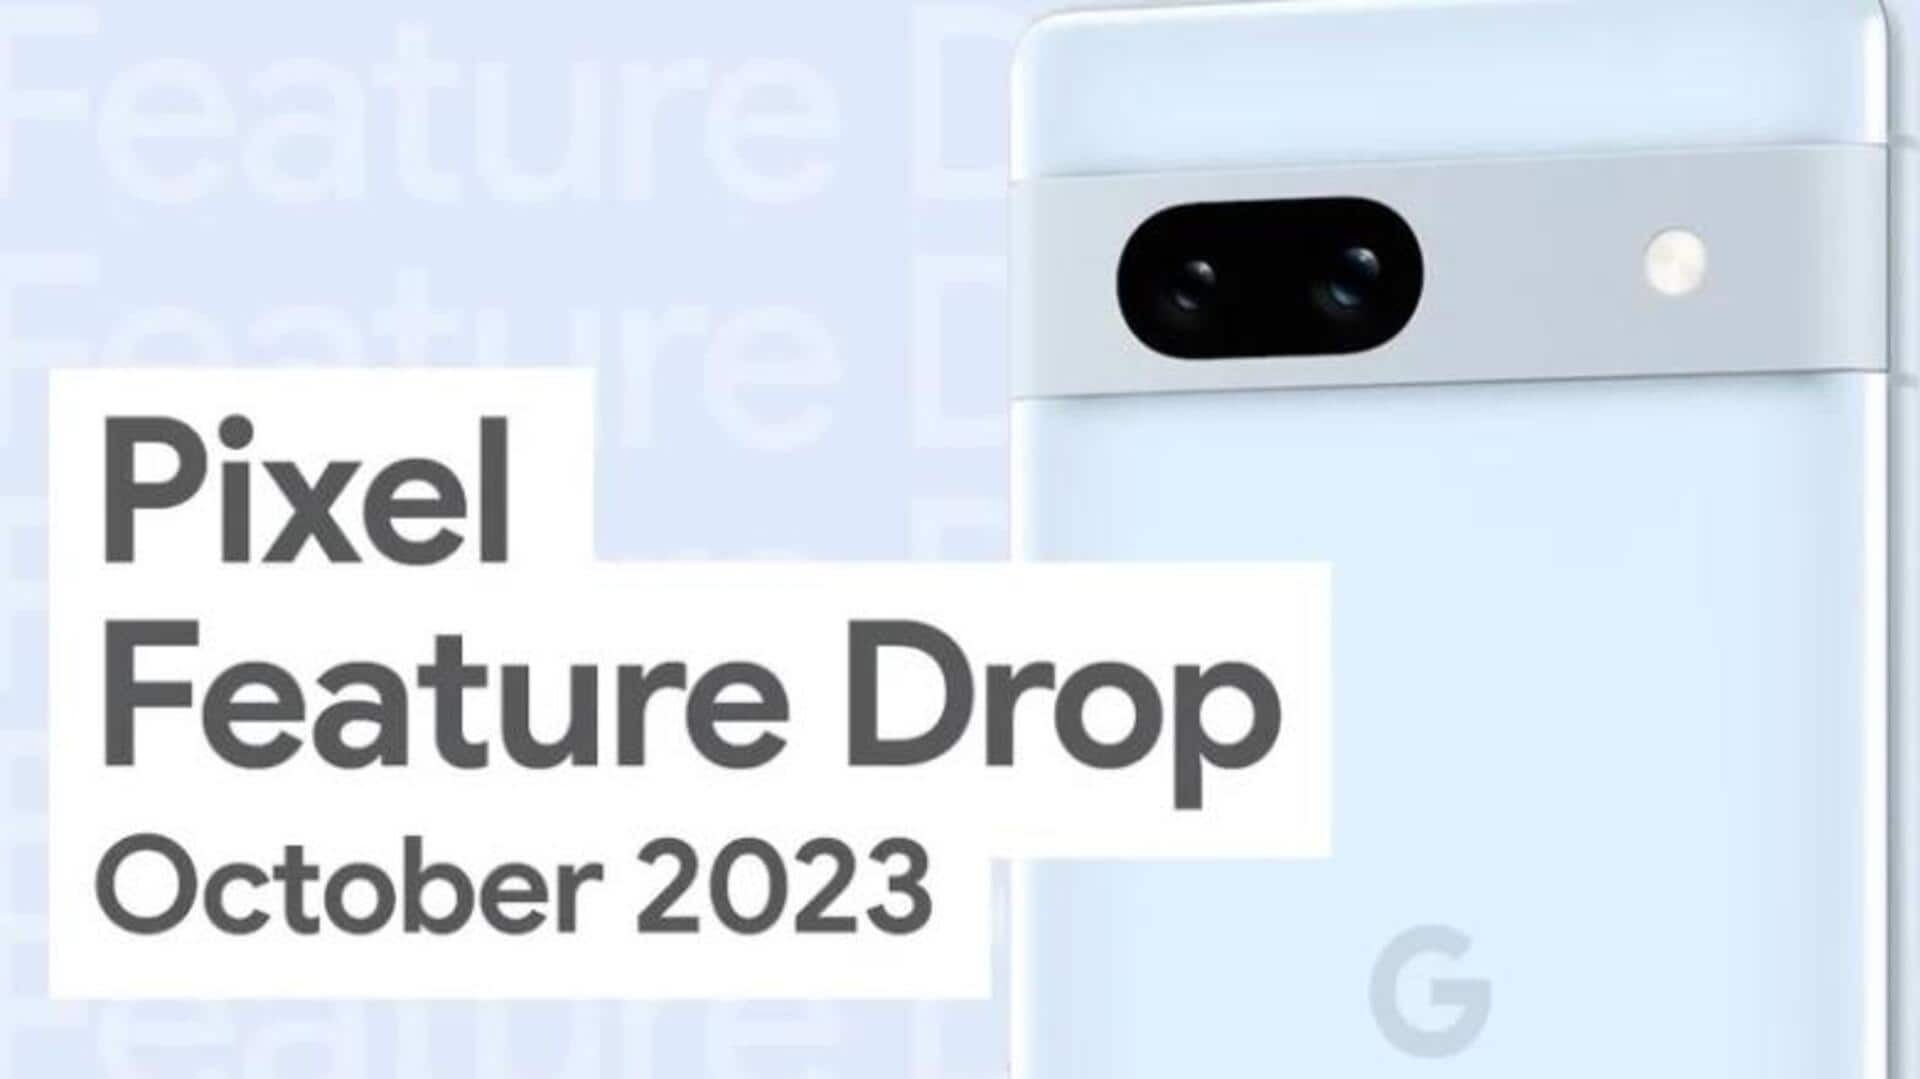 Google Pixel feature drop October 2023: Check what's new